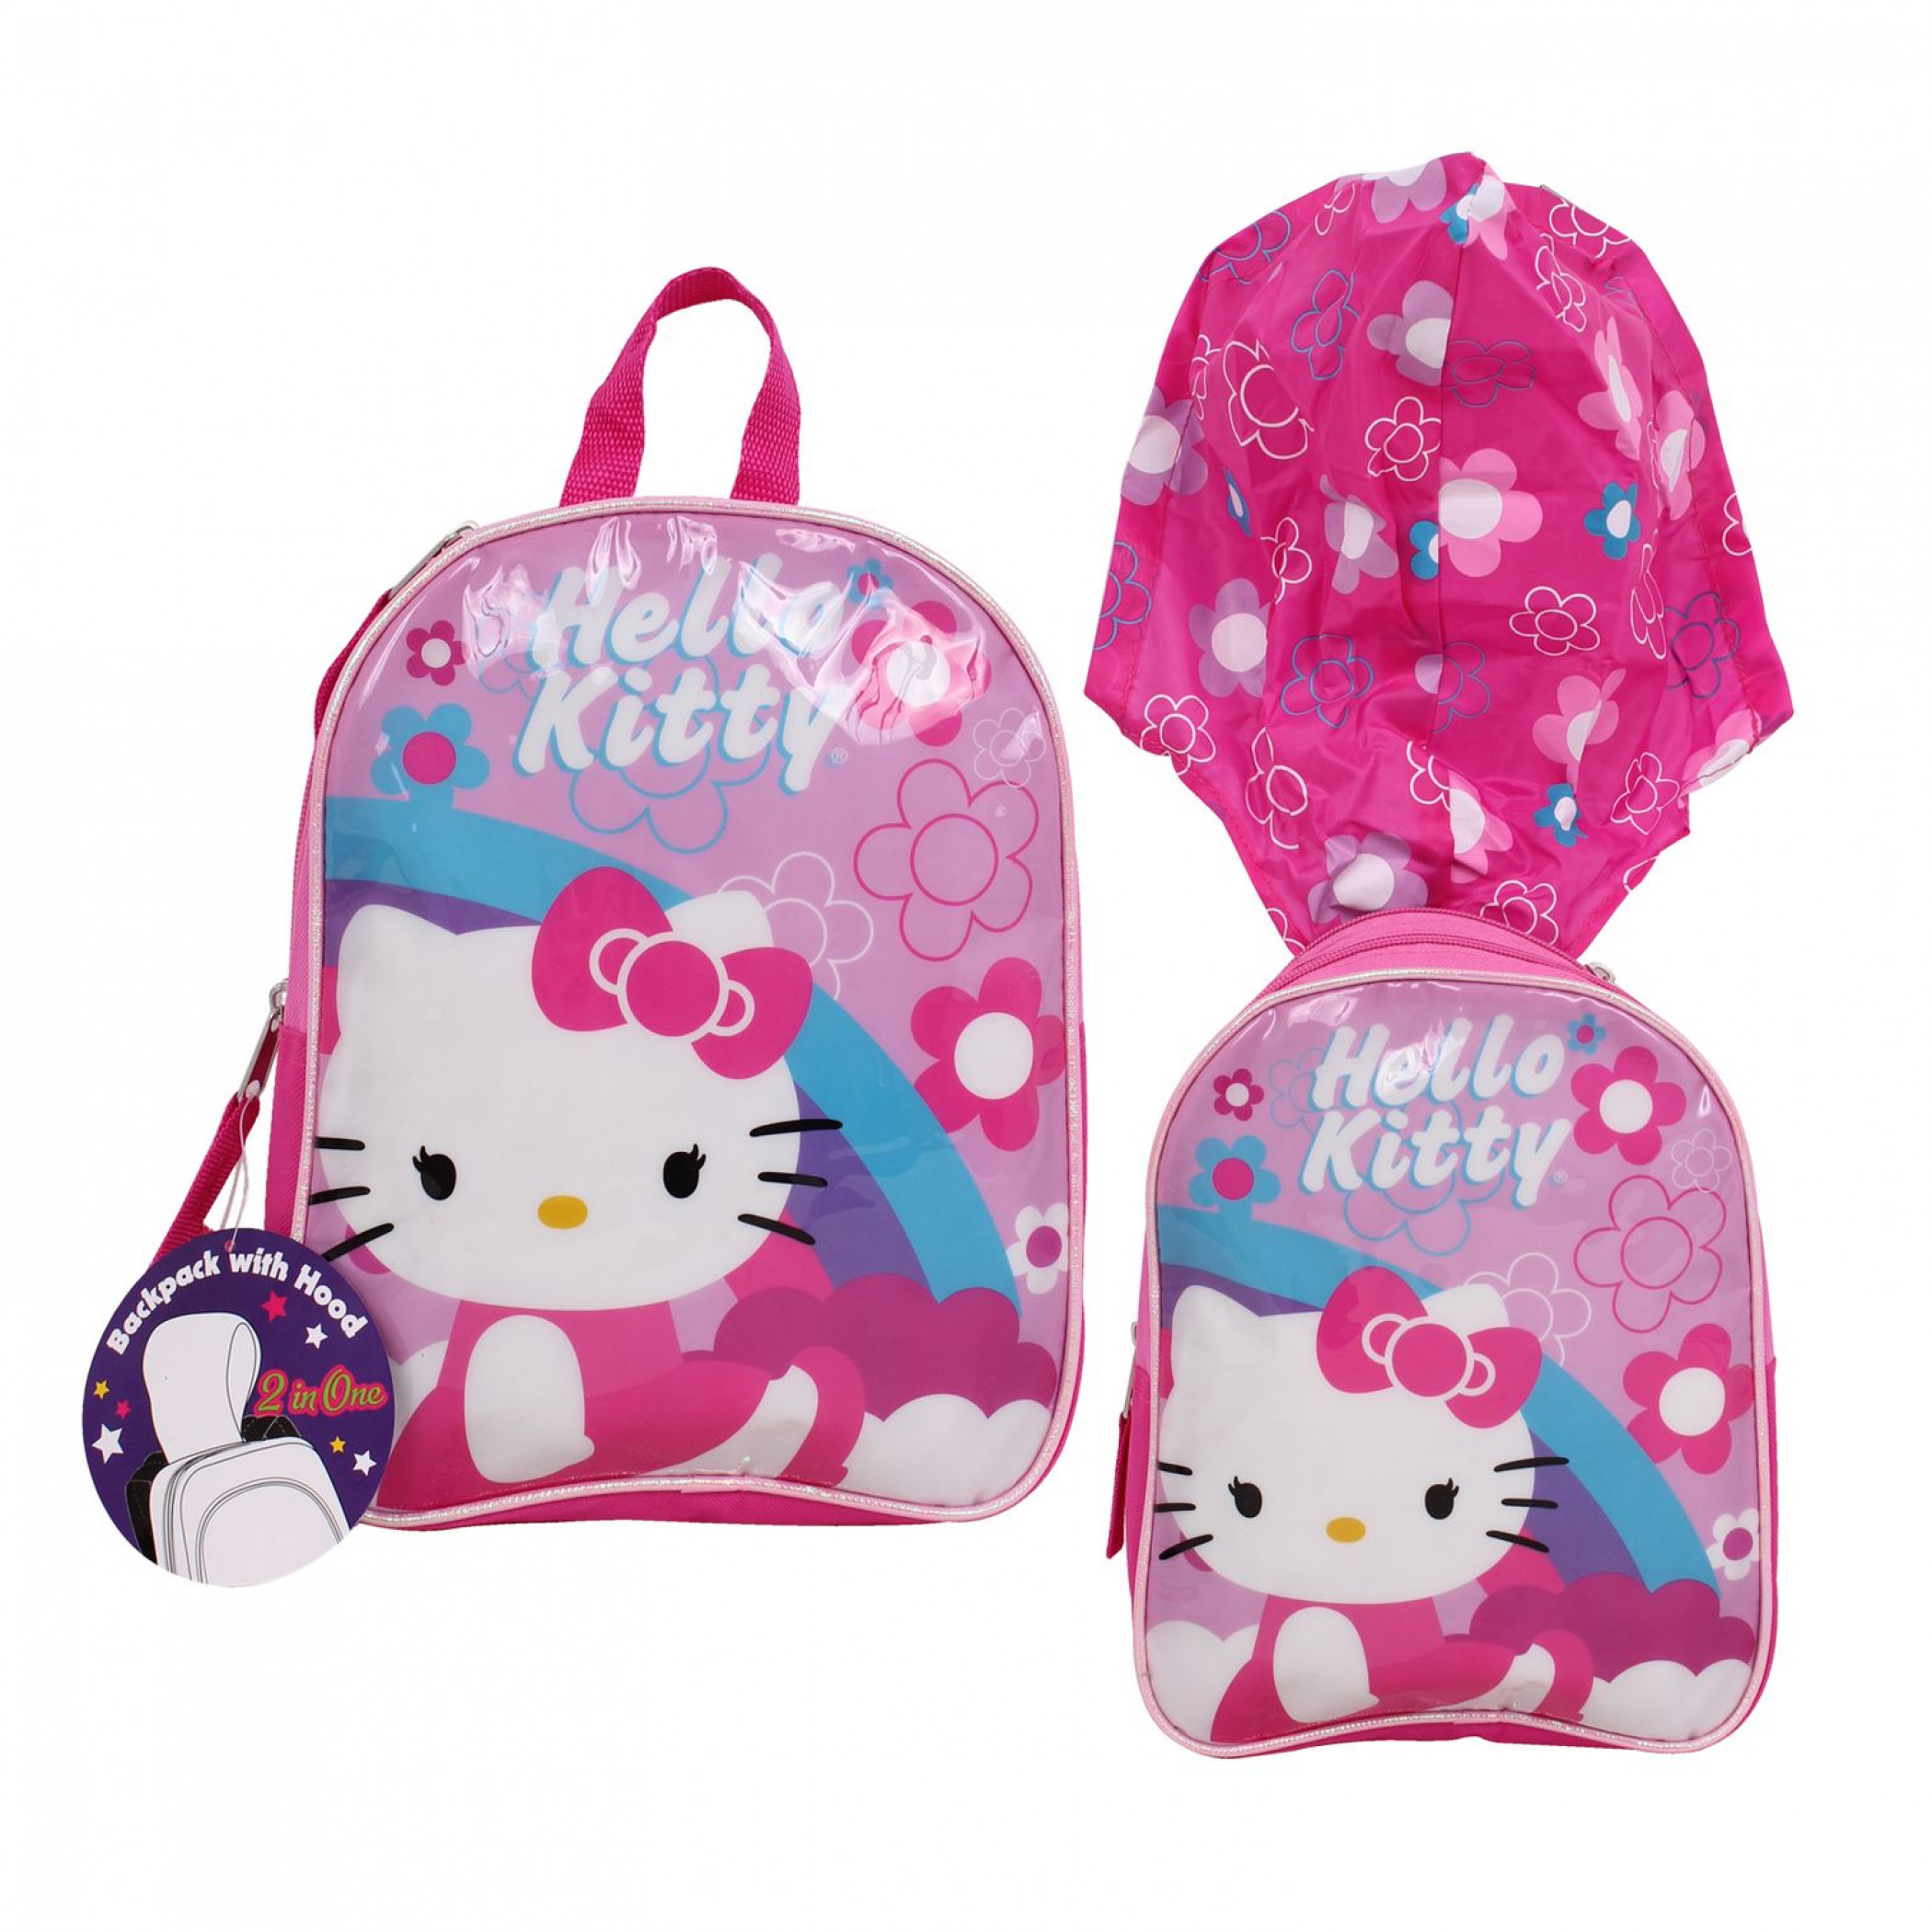 Hello Kitty Youth Backpack with Hood